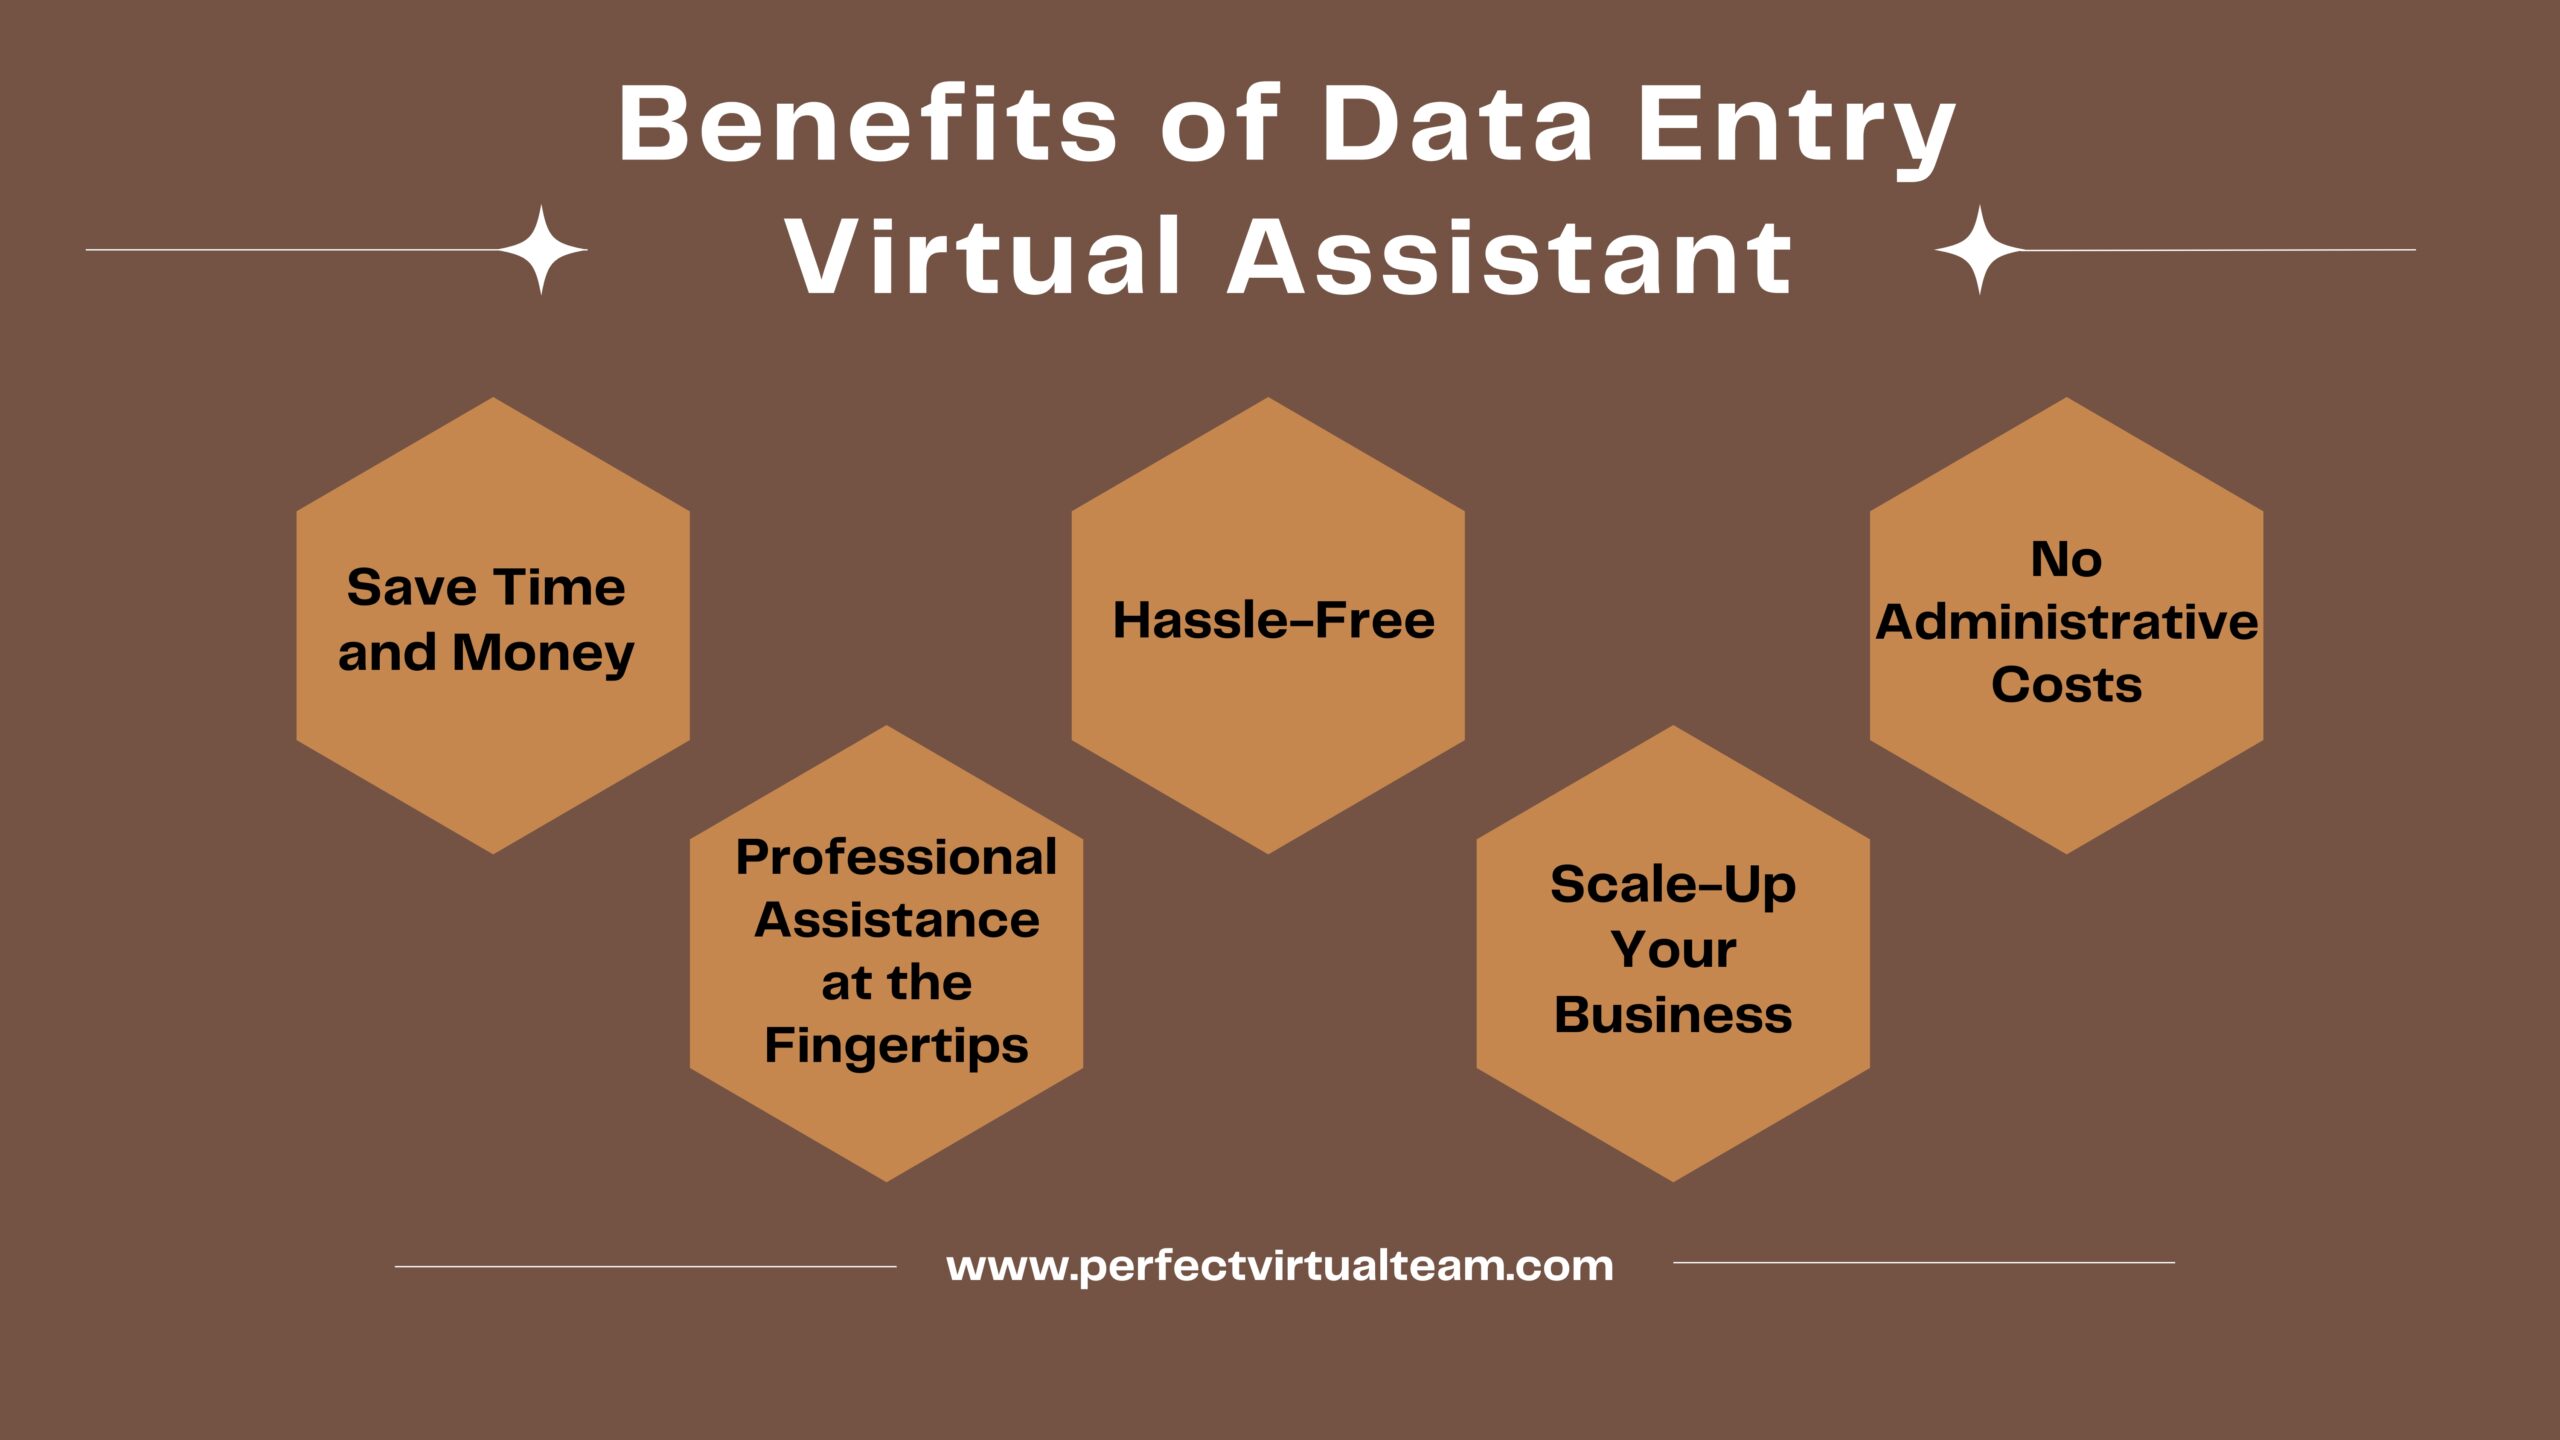 Benefits of Data Entry Virtual Assistant